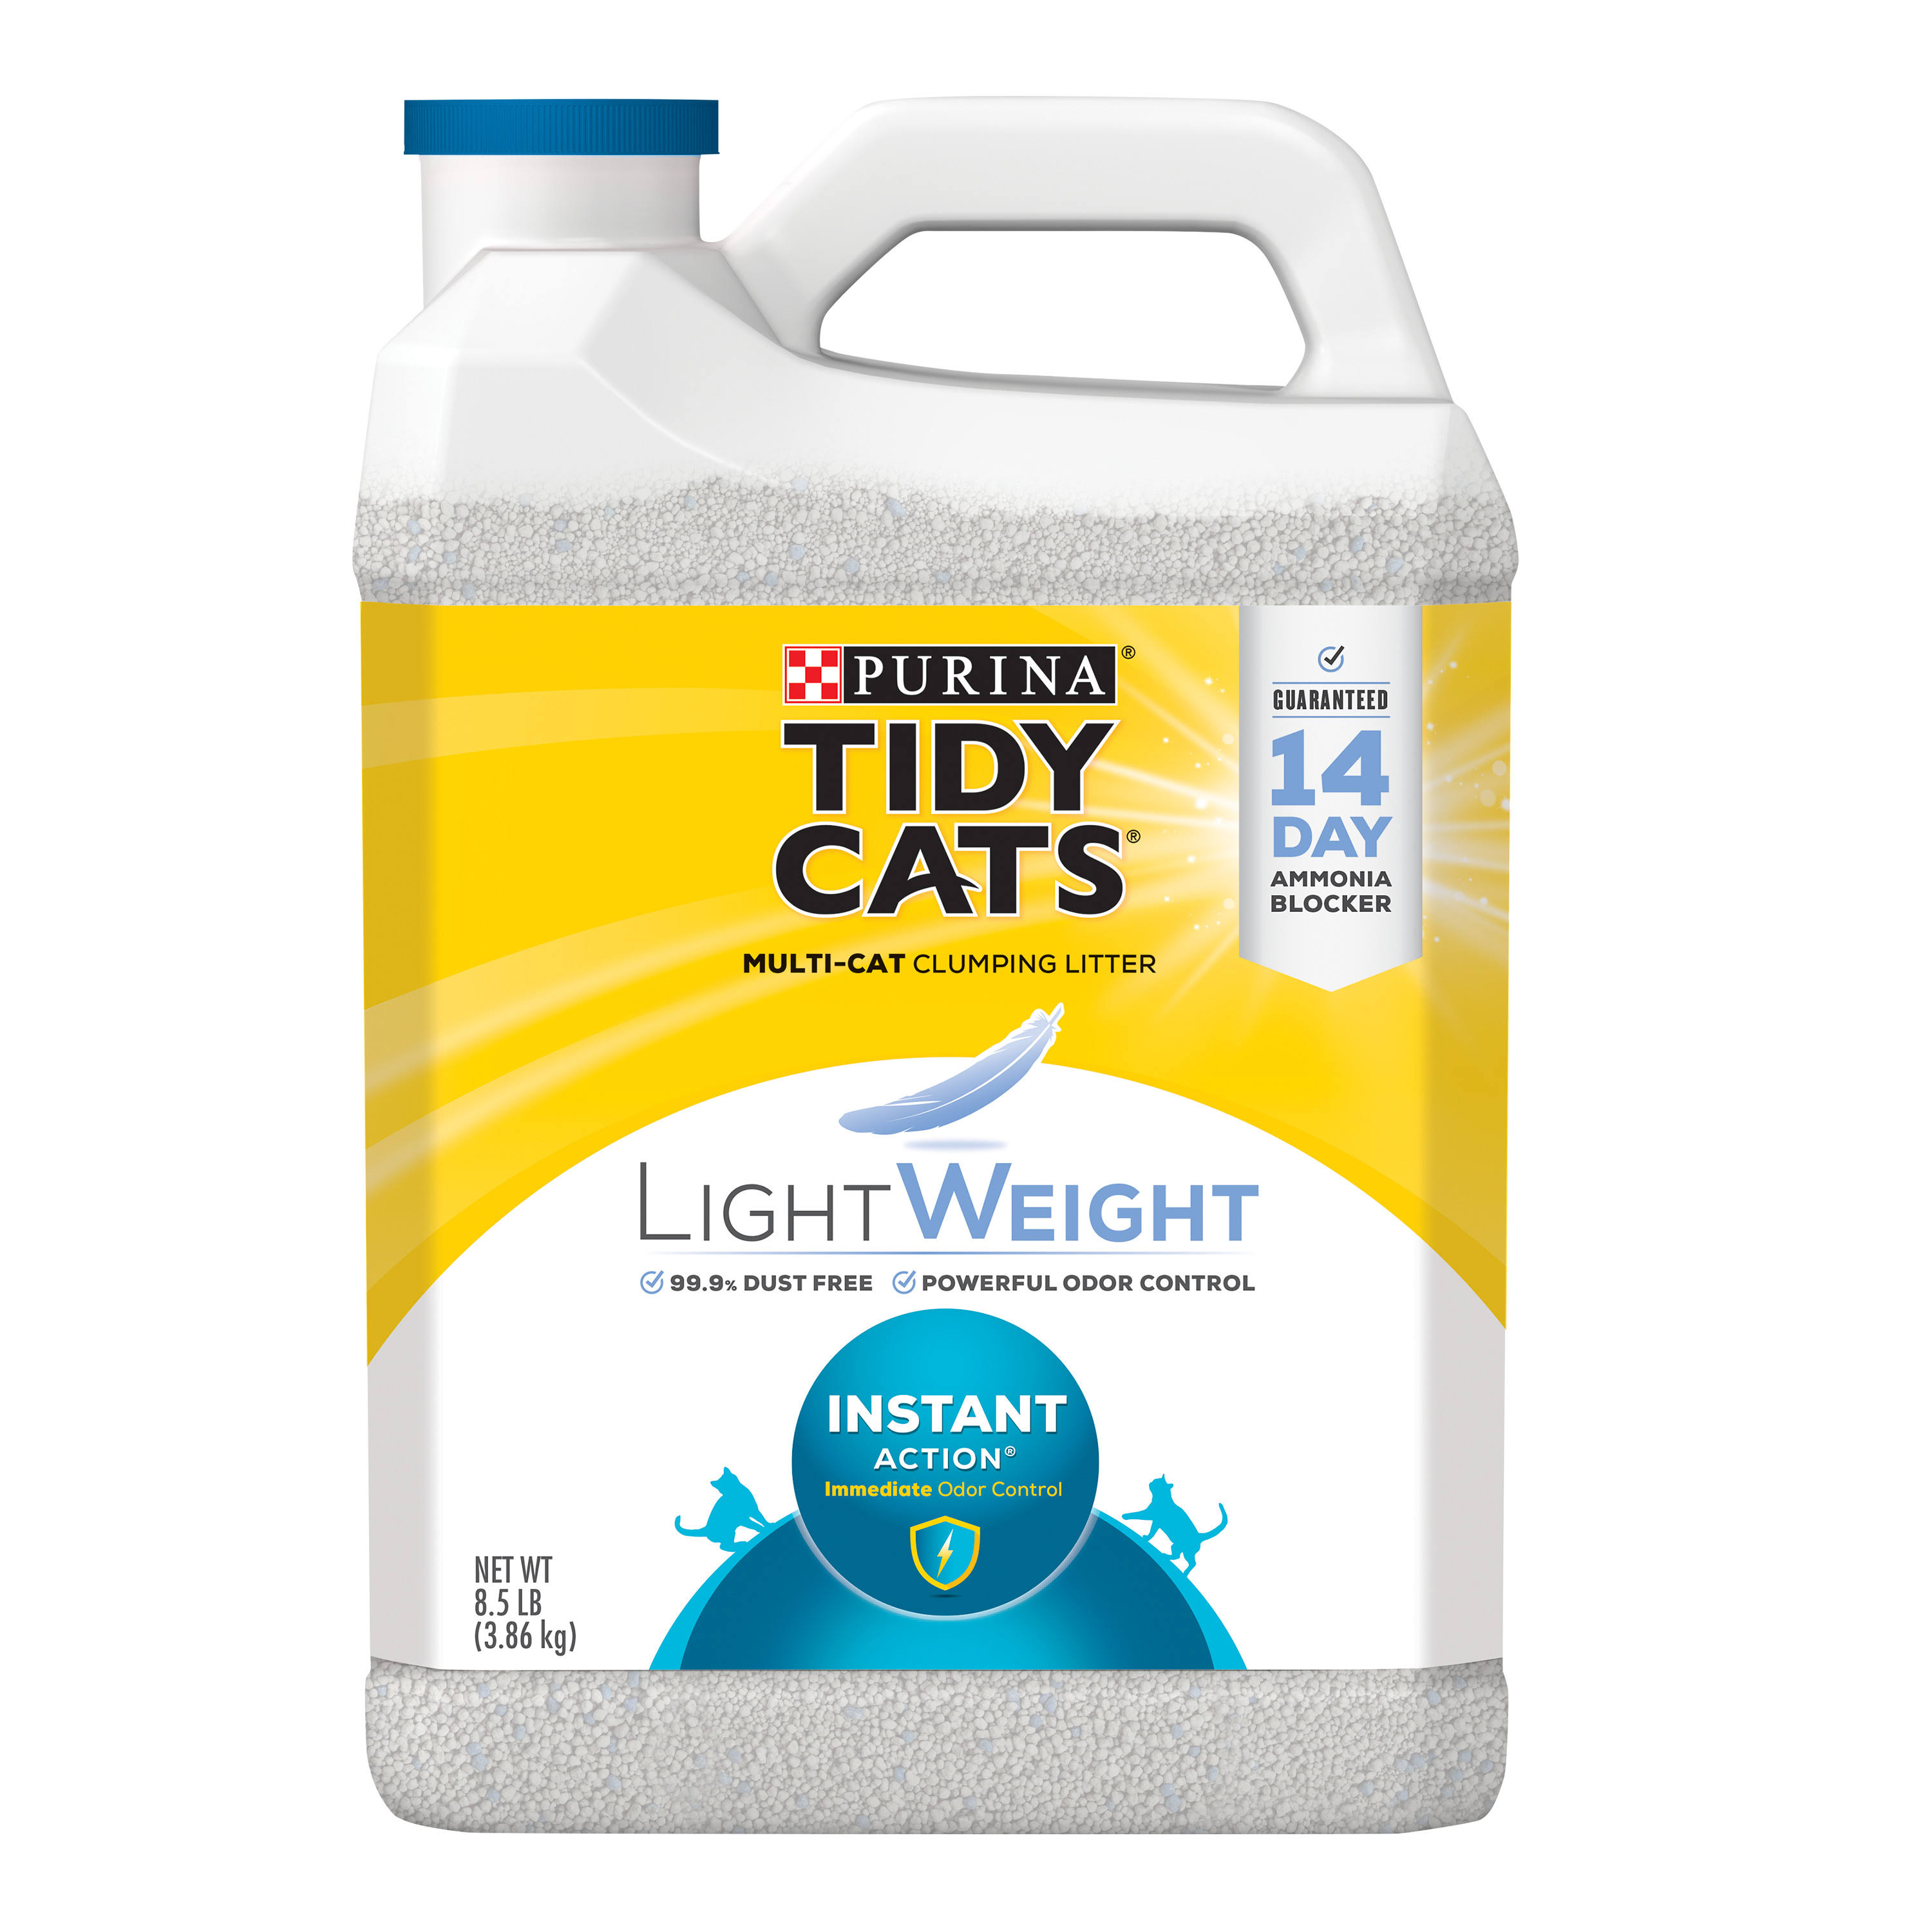 Tidy Cats Instant Action Performance LightWeight Cat Litter - 8.5lb